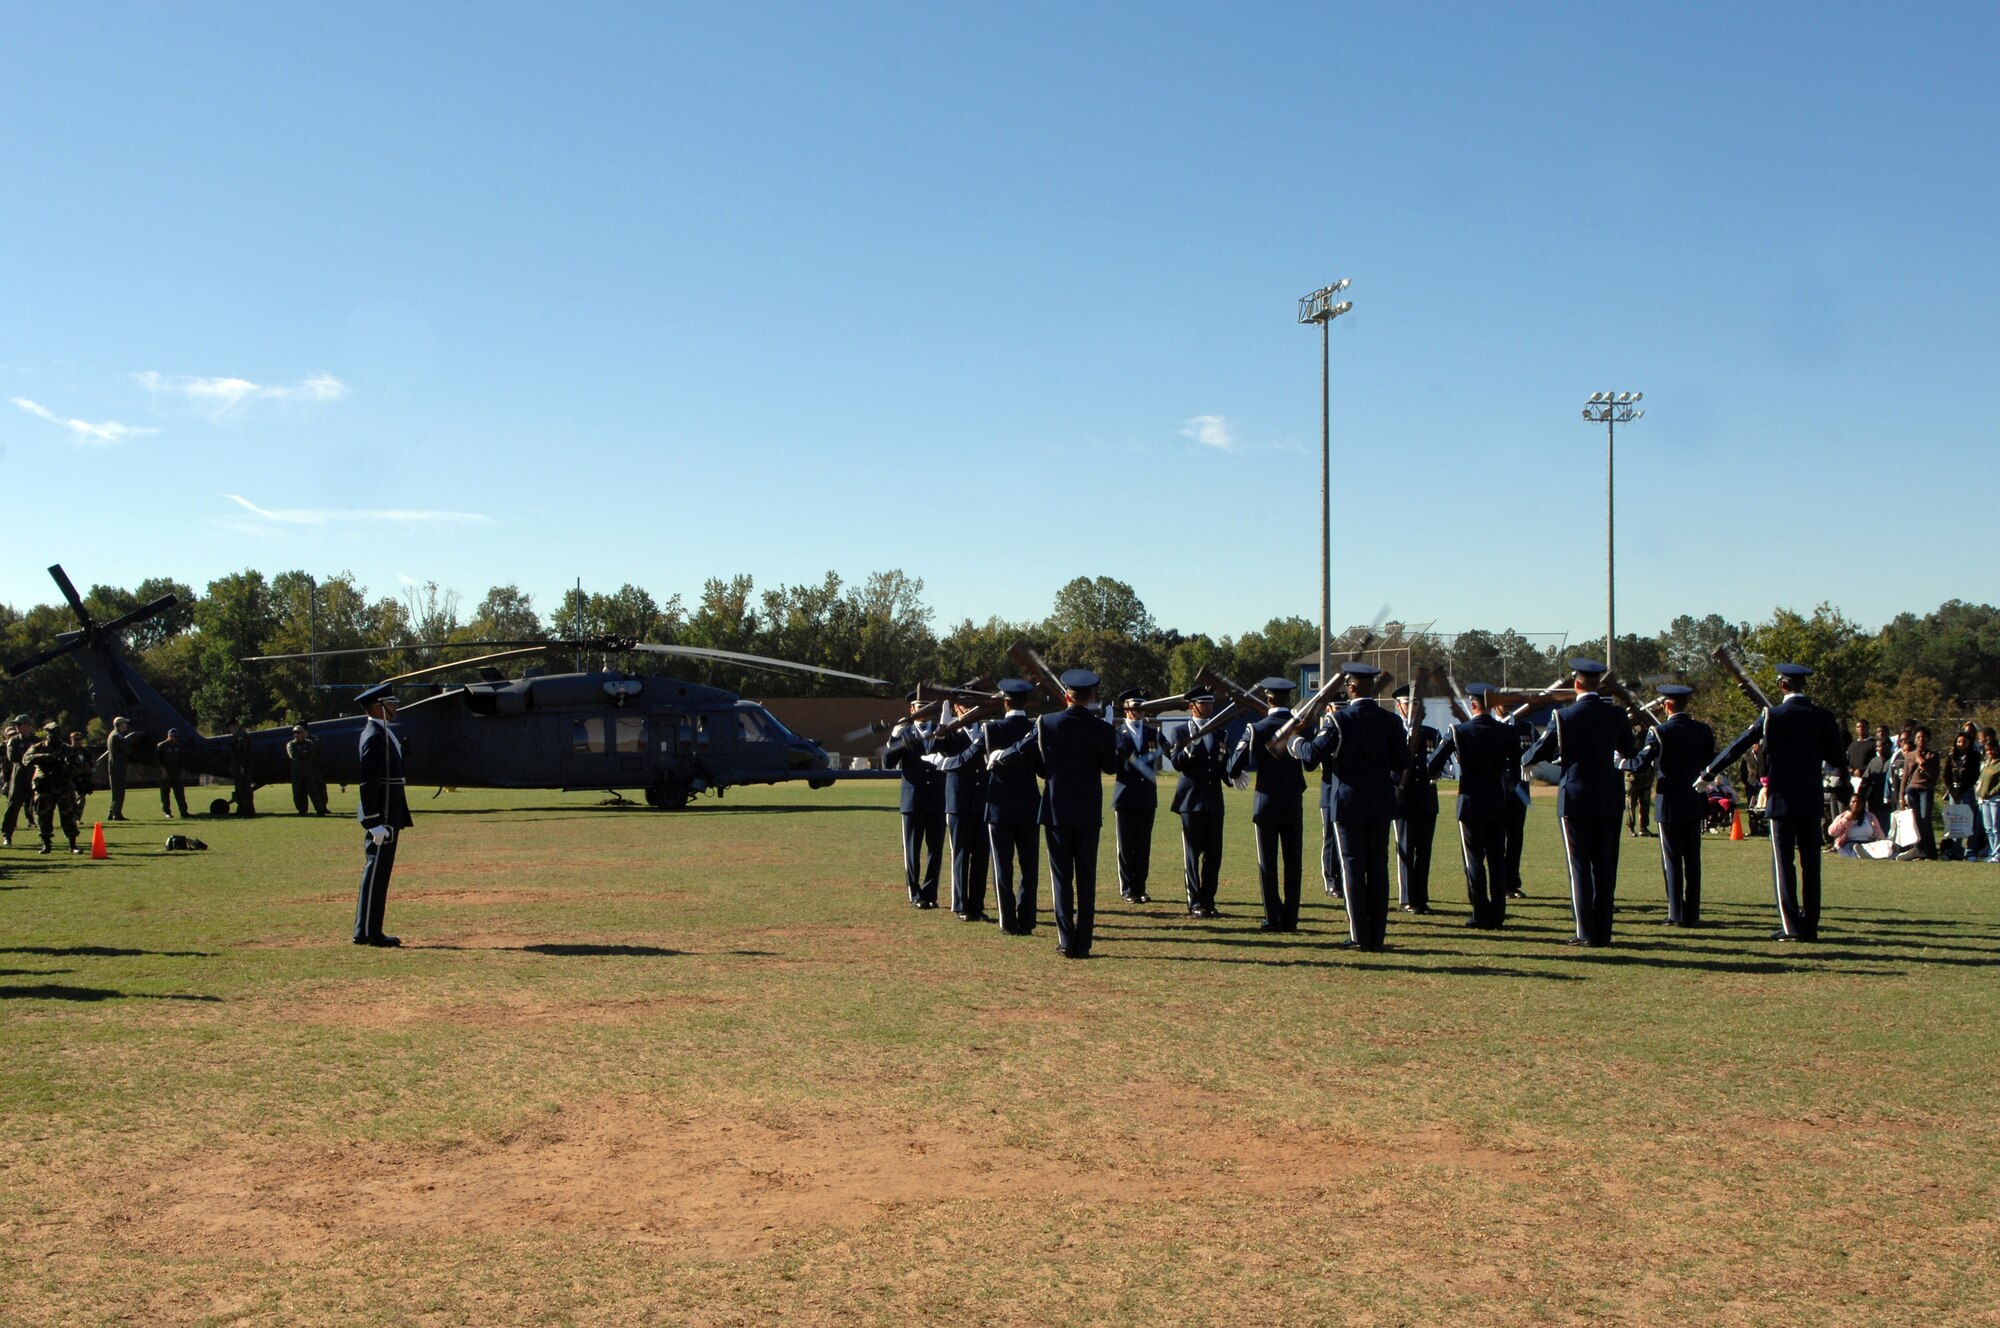 Members of the Air Force Honor Guard Drill Team perform at Lovejoy High School in Lovejoy, Ga. on October 11, 2007.  The drill team visited several area high schools, with other Air Force demo teams, as part of Air Force Week Atlanta events leading up to the Great Georgia Air Show in Peachtree City, Ga., and promoted the AF mission by showcasing drill performances at public and military venues to recruit, retain, and inspire Airmen. ( U.S. Air Force photo/Airman First Class Tim Chacon)(Released)